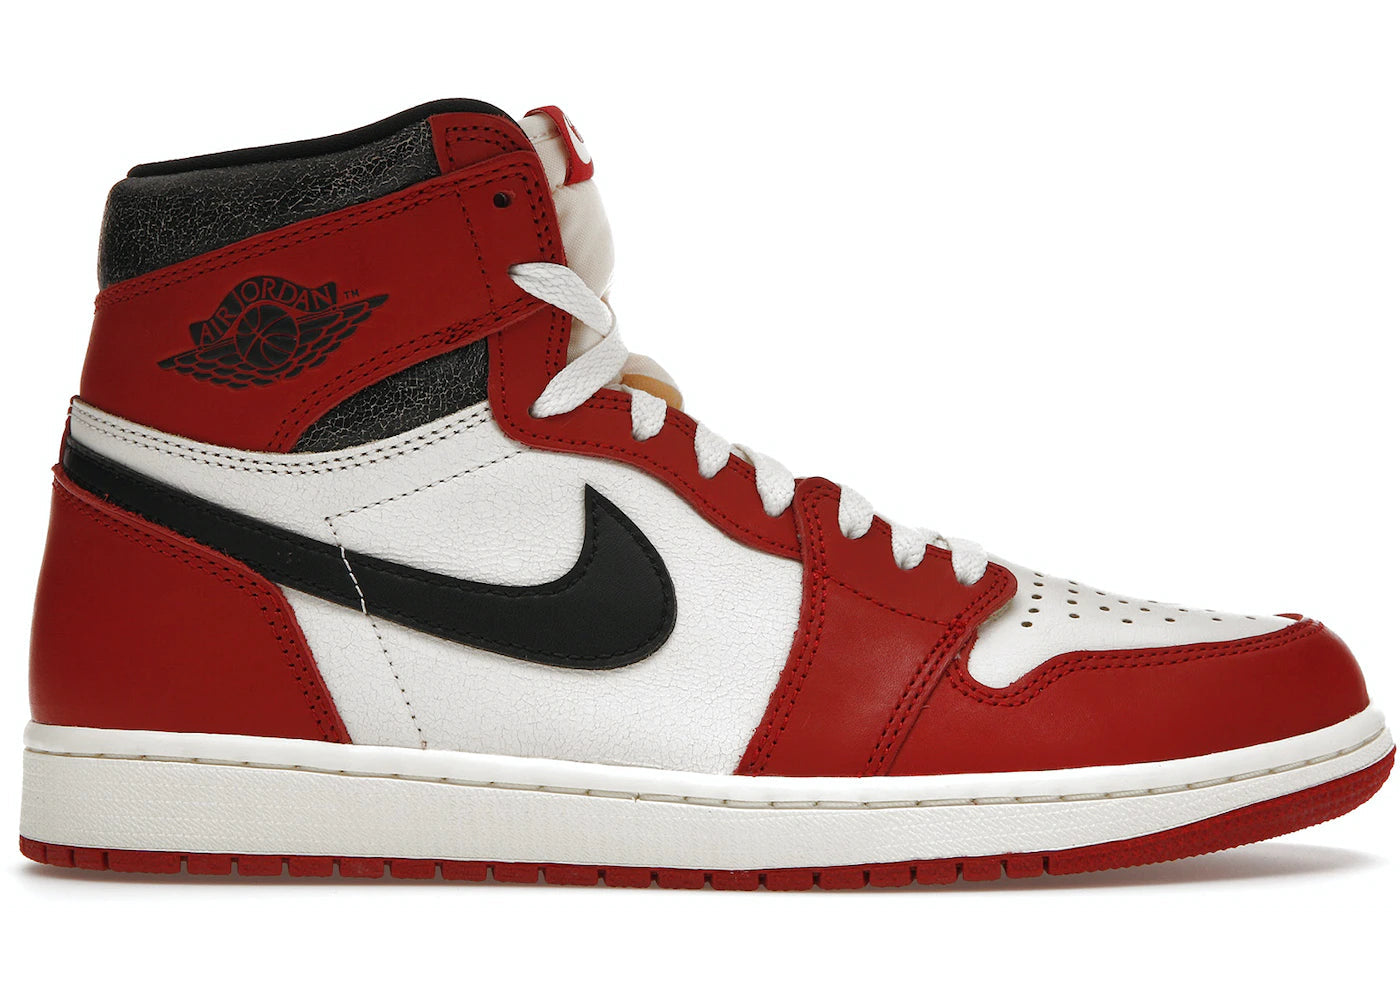 Jordan 1 Retro High OG Chicago Lost and Found – Sole Priorities